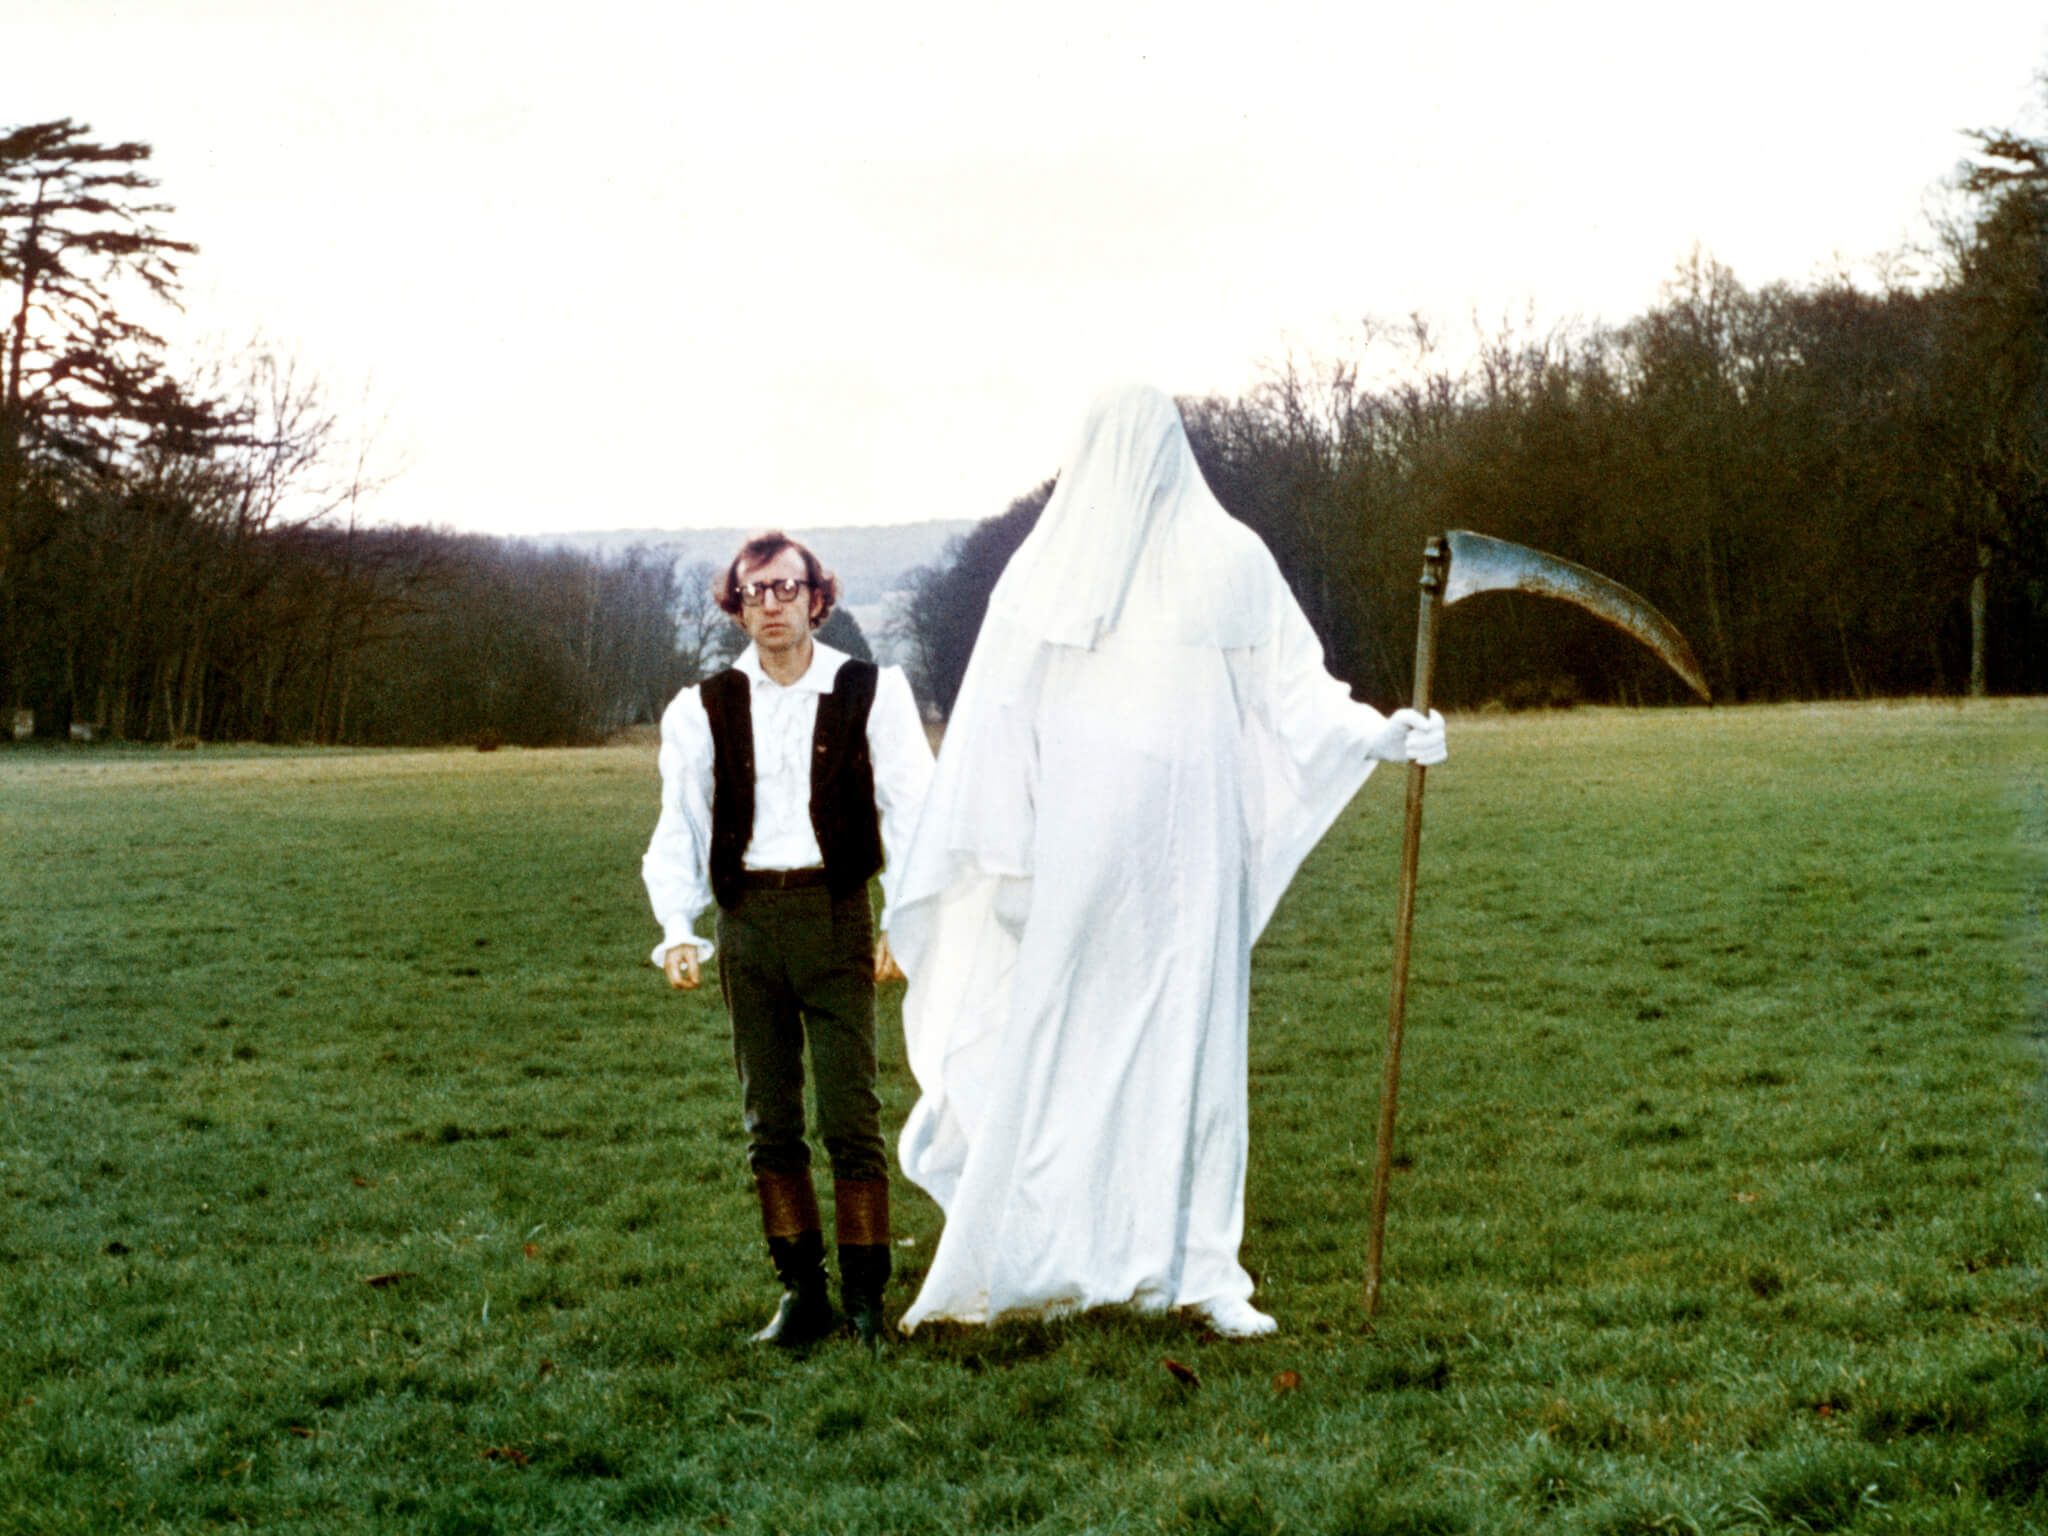 On the set of Love and Death